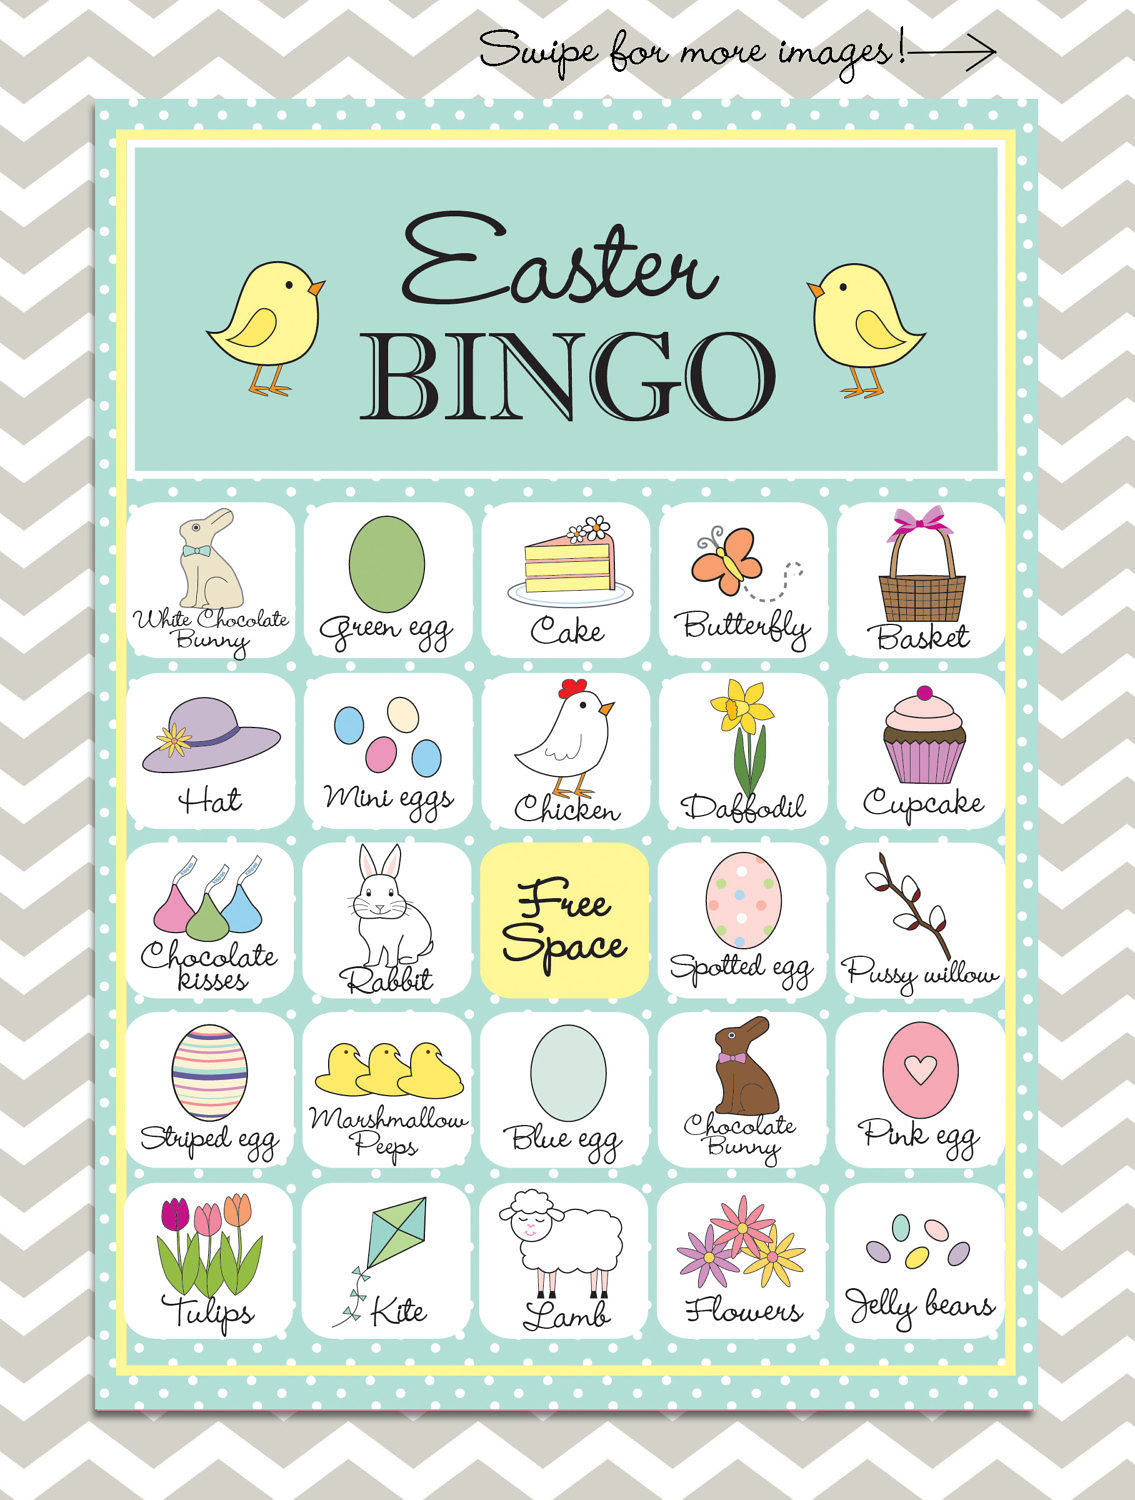 20-easter-bingo-cards-kids-party-prefilled-unique-game-cards-etsy